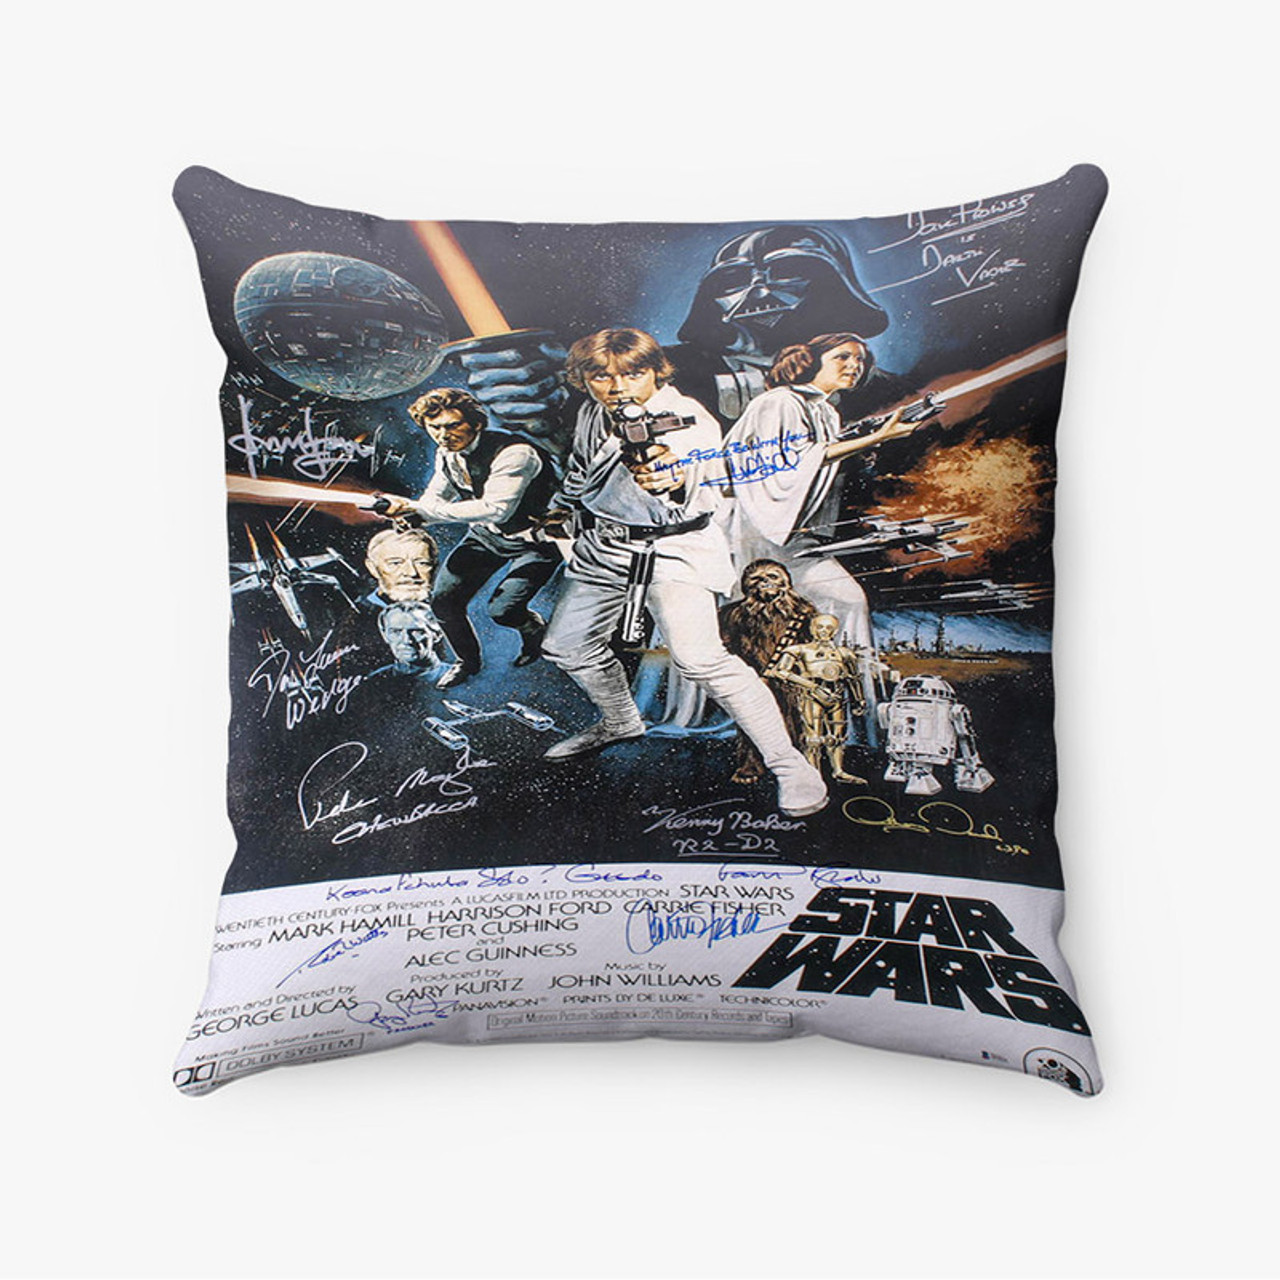 https://cdn11.bigcommerce.com/s-xhmrmcecz5/images/stencil/1280x1280/products/201632/206992/Star-Wars-Poster-Signed-By-Cast-Custom-Pillow-Case__48944.1673680282.jpg?c=1